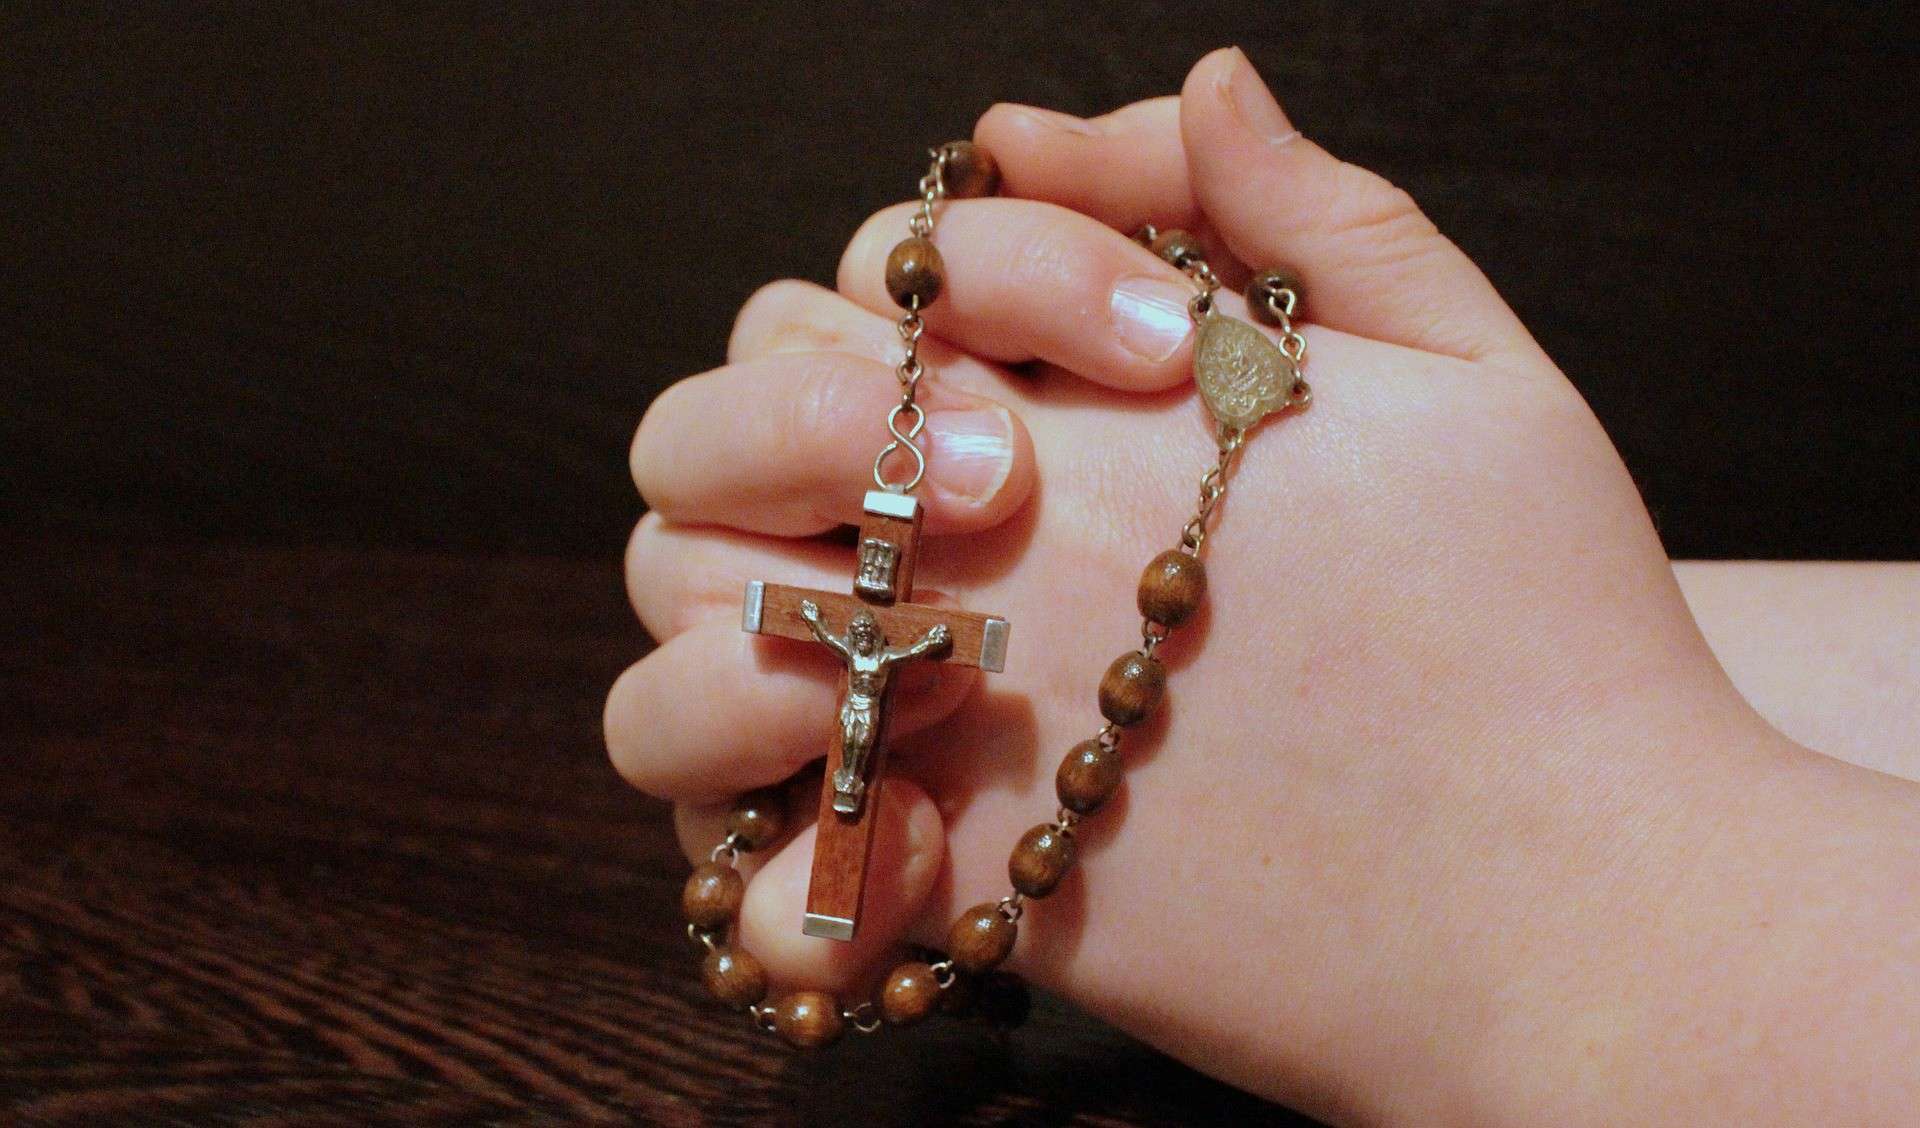 Hands with a rosary